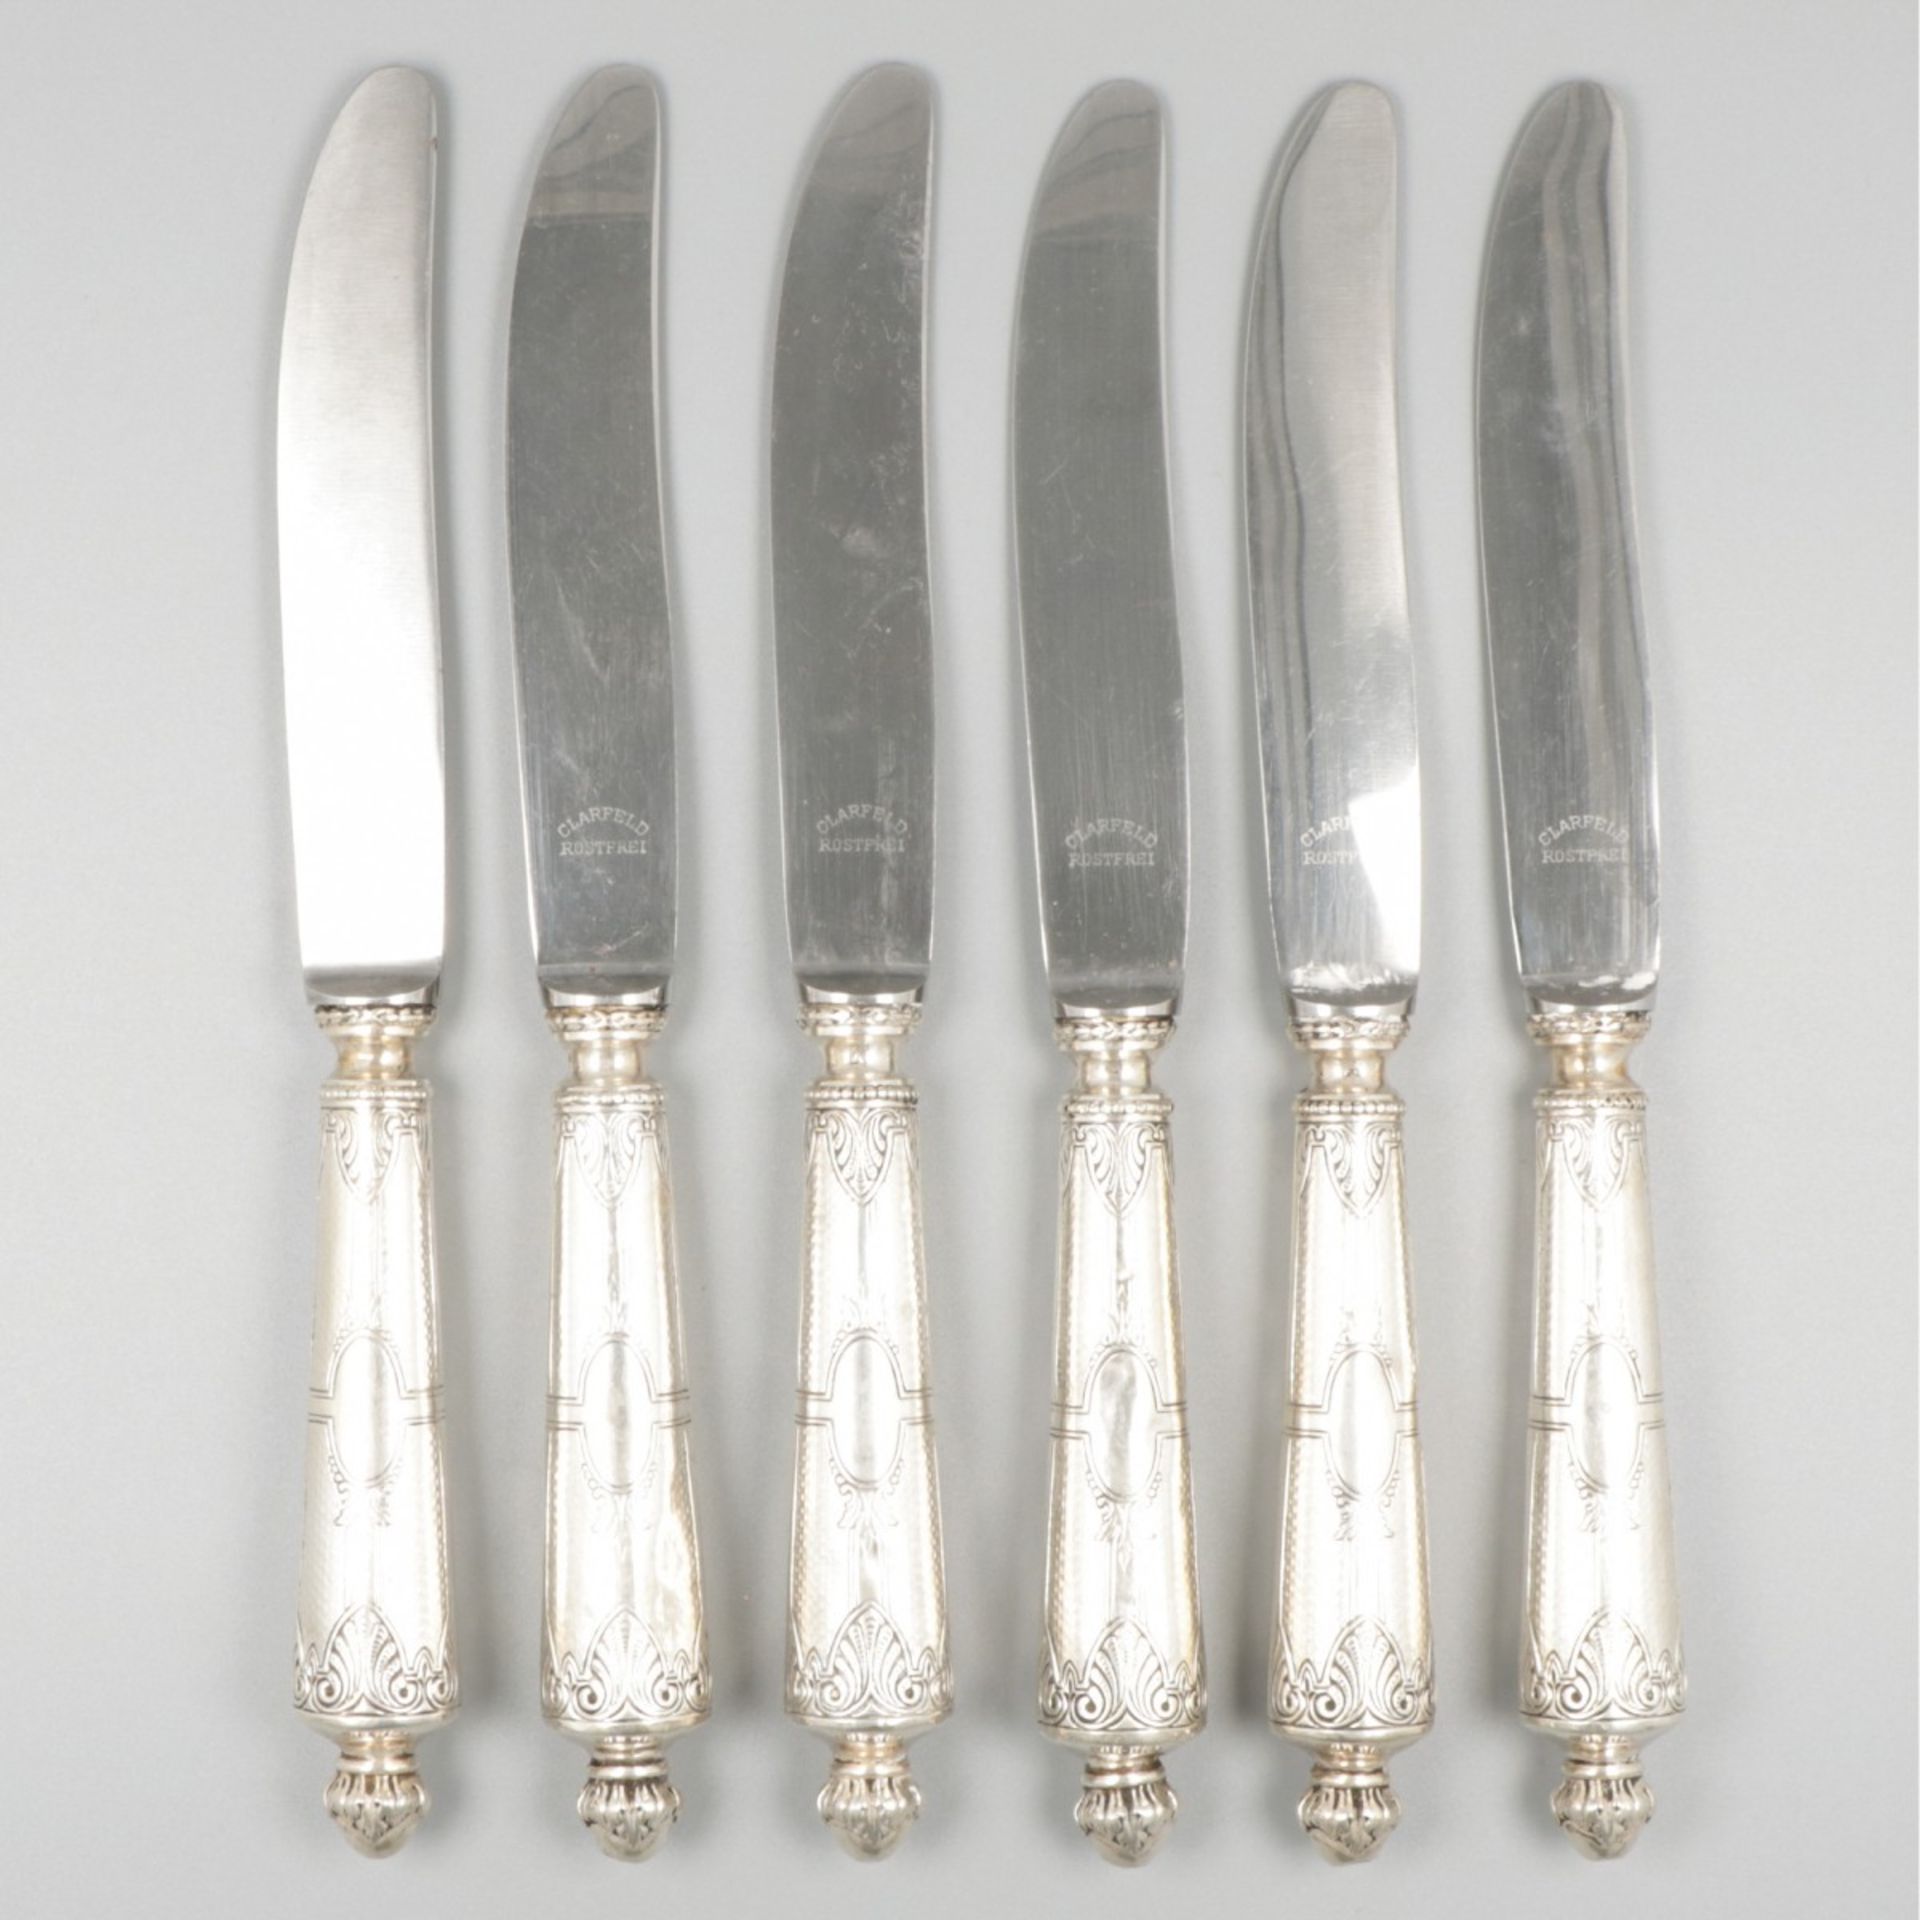 6-piece set dinner knives silver. - Image 2 of 5